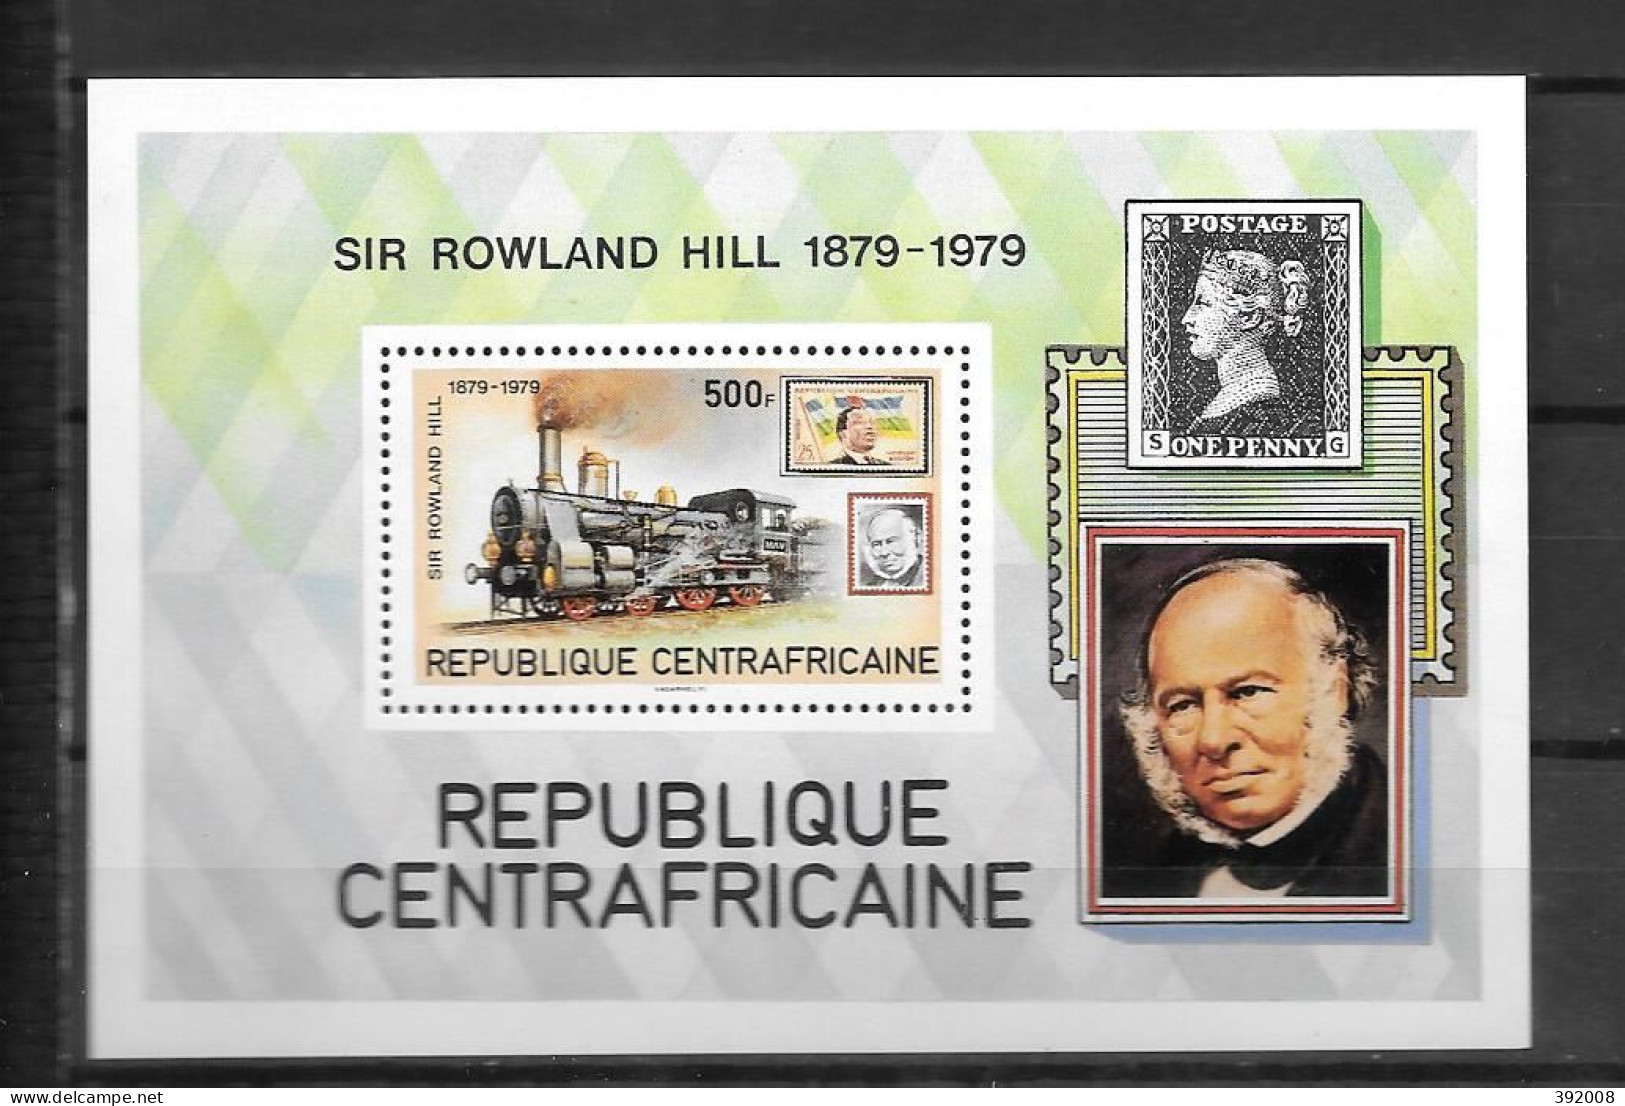 BF - 1979 - 39 **MNH - Rowland Hill - Central African Republic